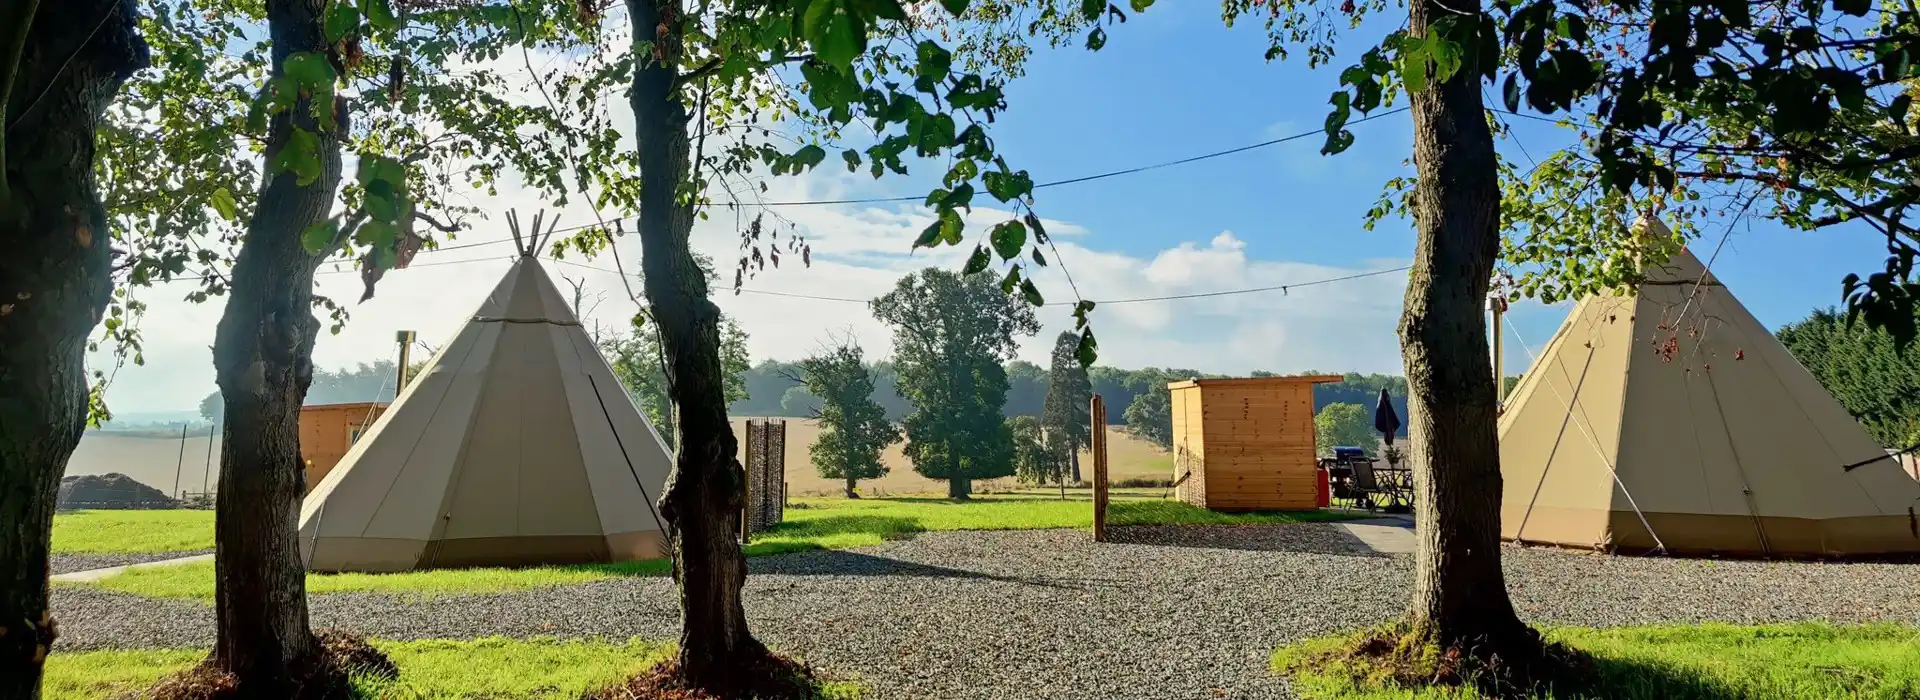 Tipi and wigwam holidays with hot tubs